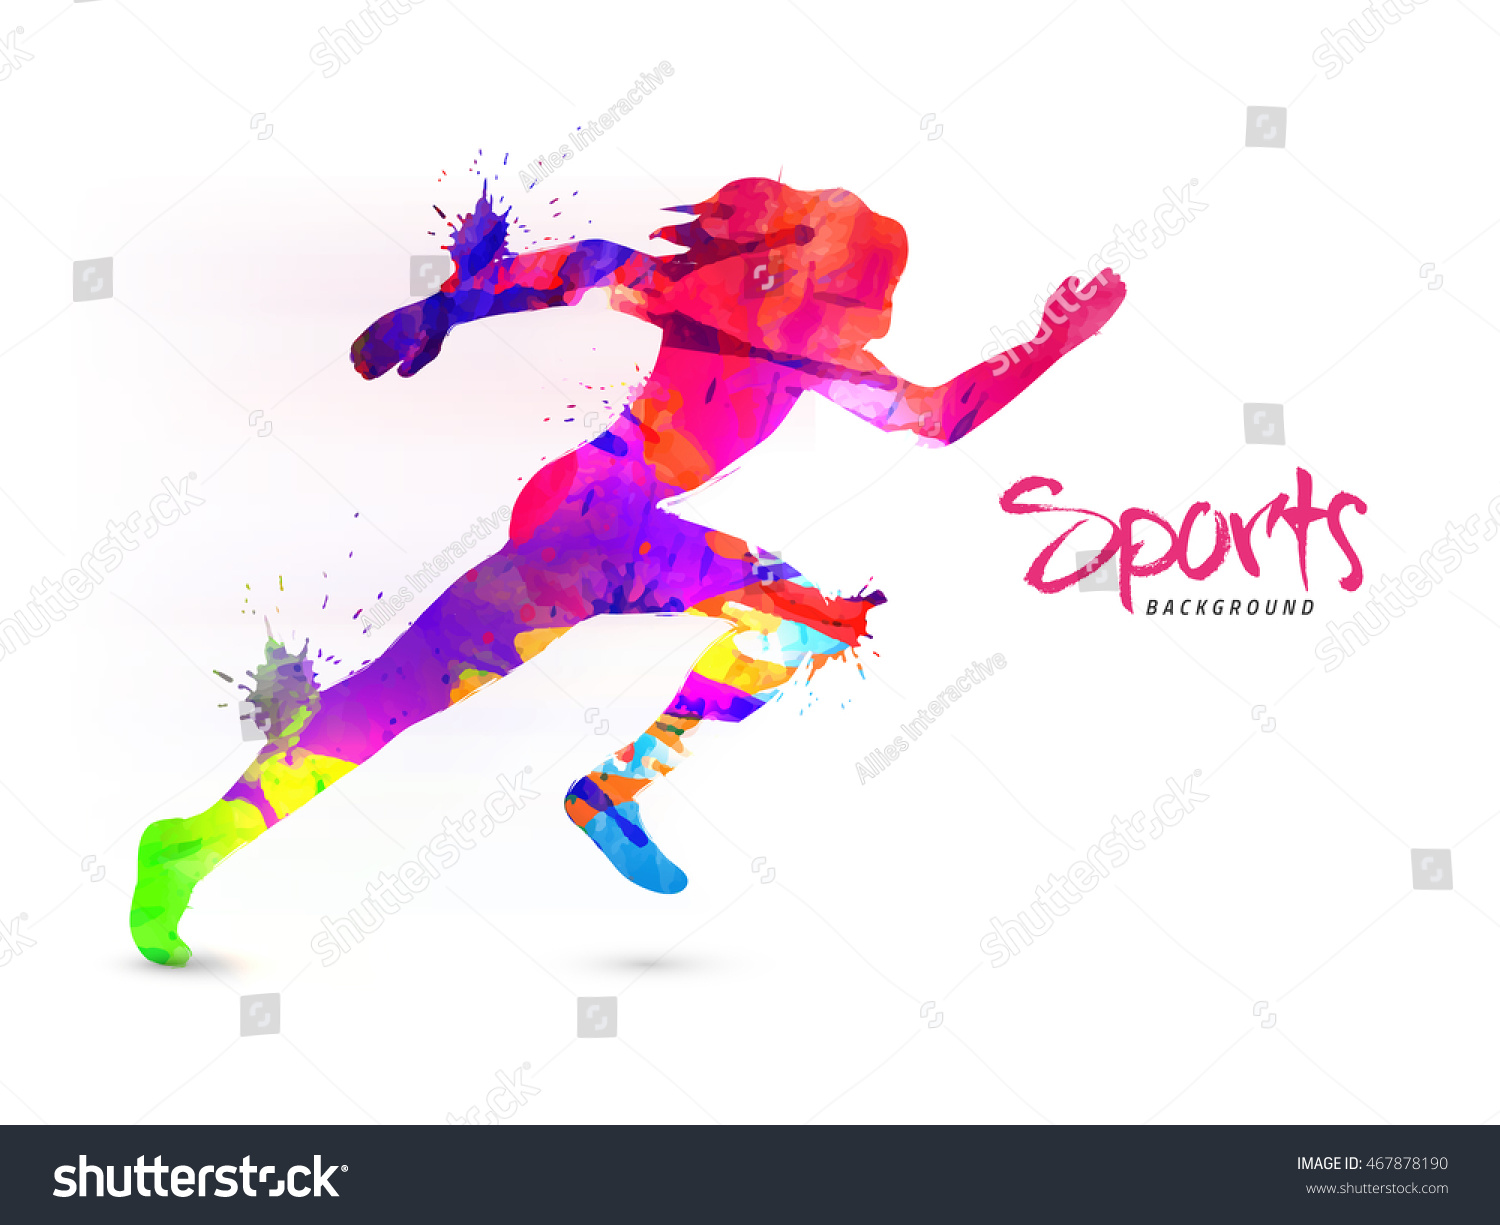 Creative Sports Background Abstract Colorful Illustration Stock Vector Royalty Free